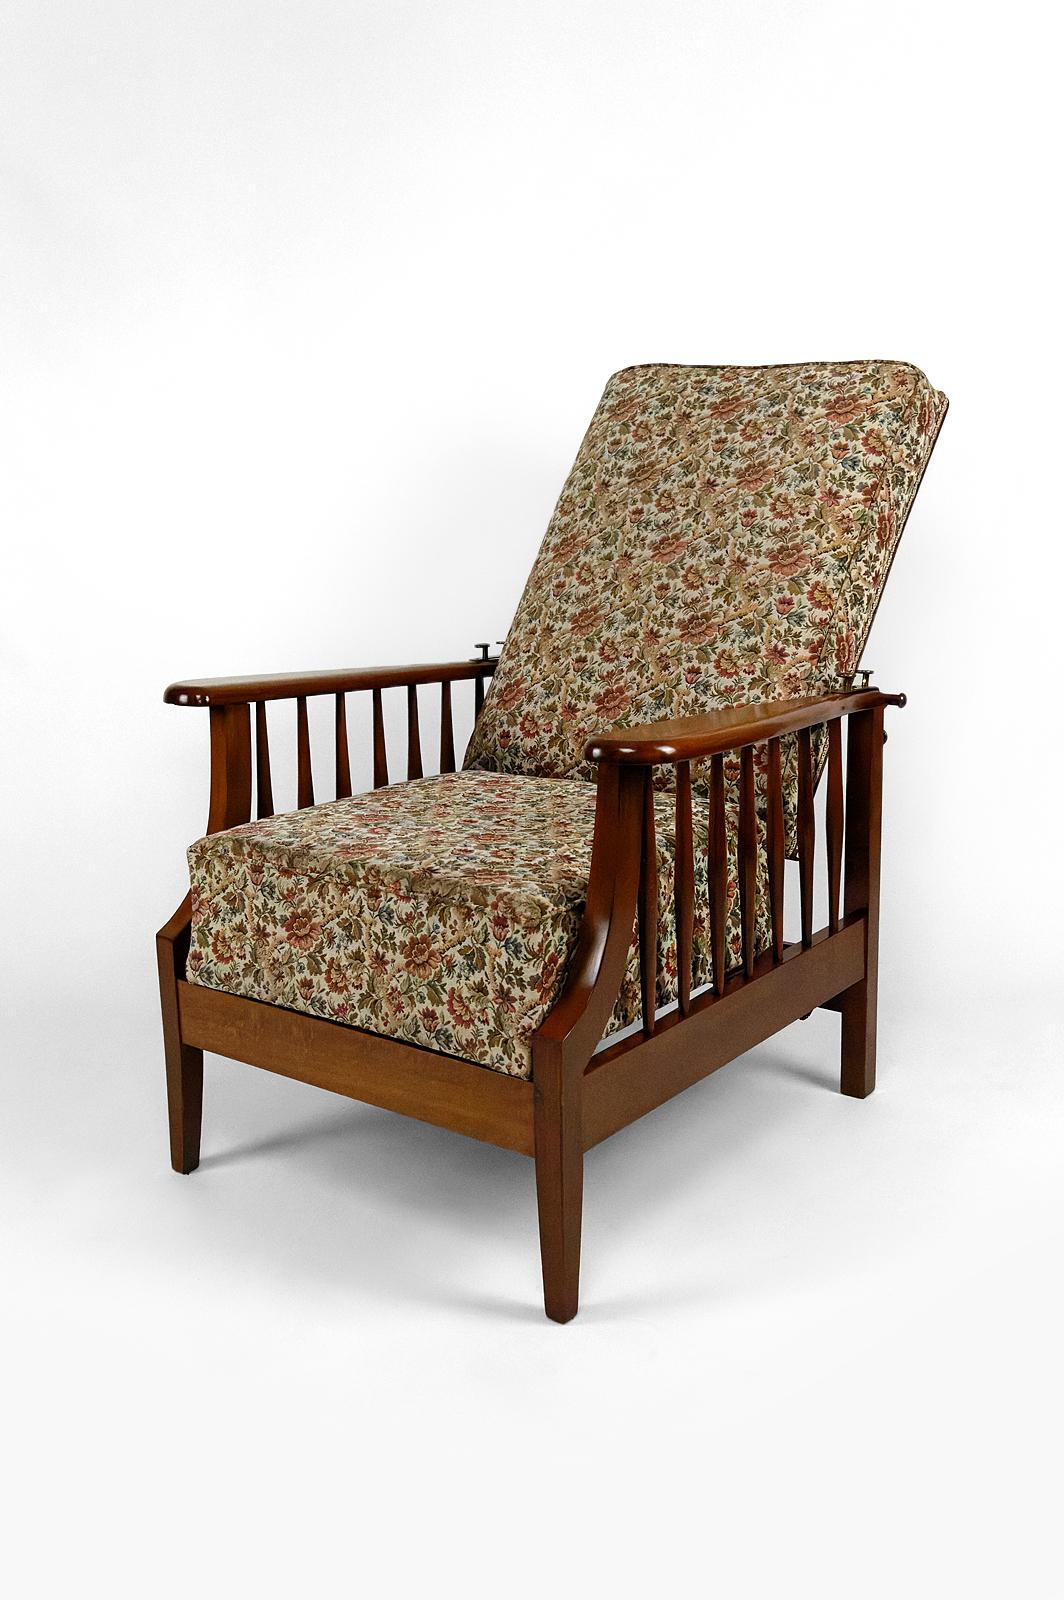 Morris armchair.
Arts & Crafts.
United Kingdom, Circa 1900

Backrest inclination adjustable by rack system.

Beech wood structure

In good condition.
Reupholstered a few years ago with a multicolored floral fabric, slight traces of use of the